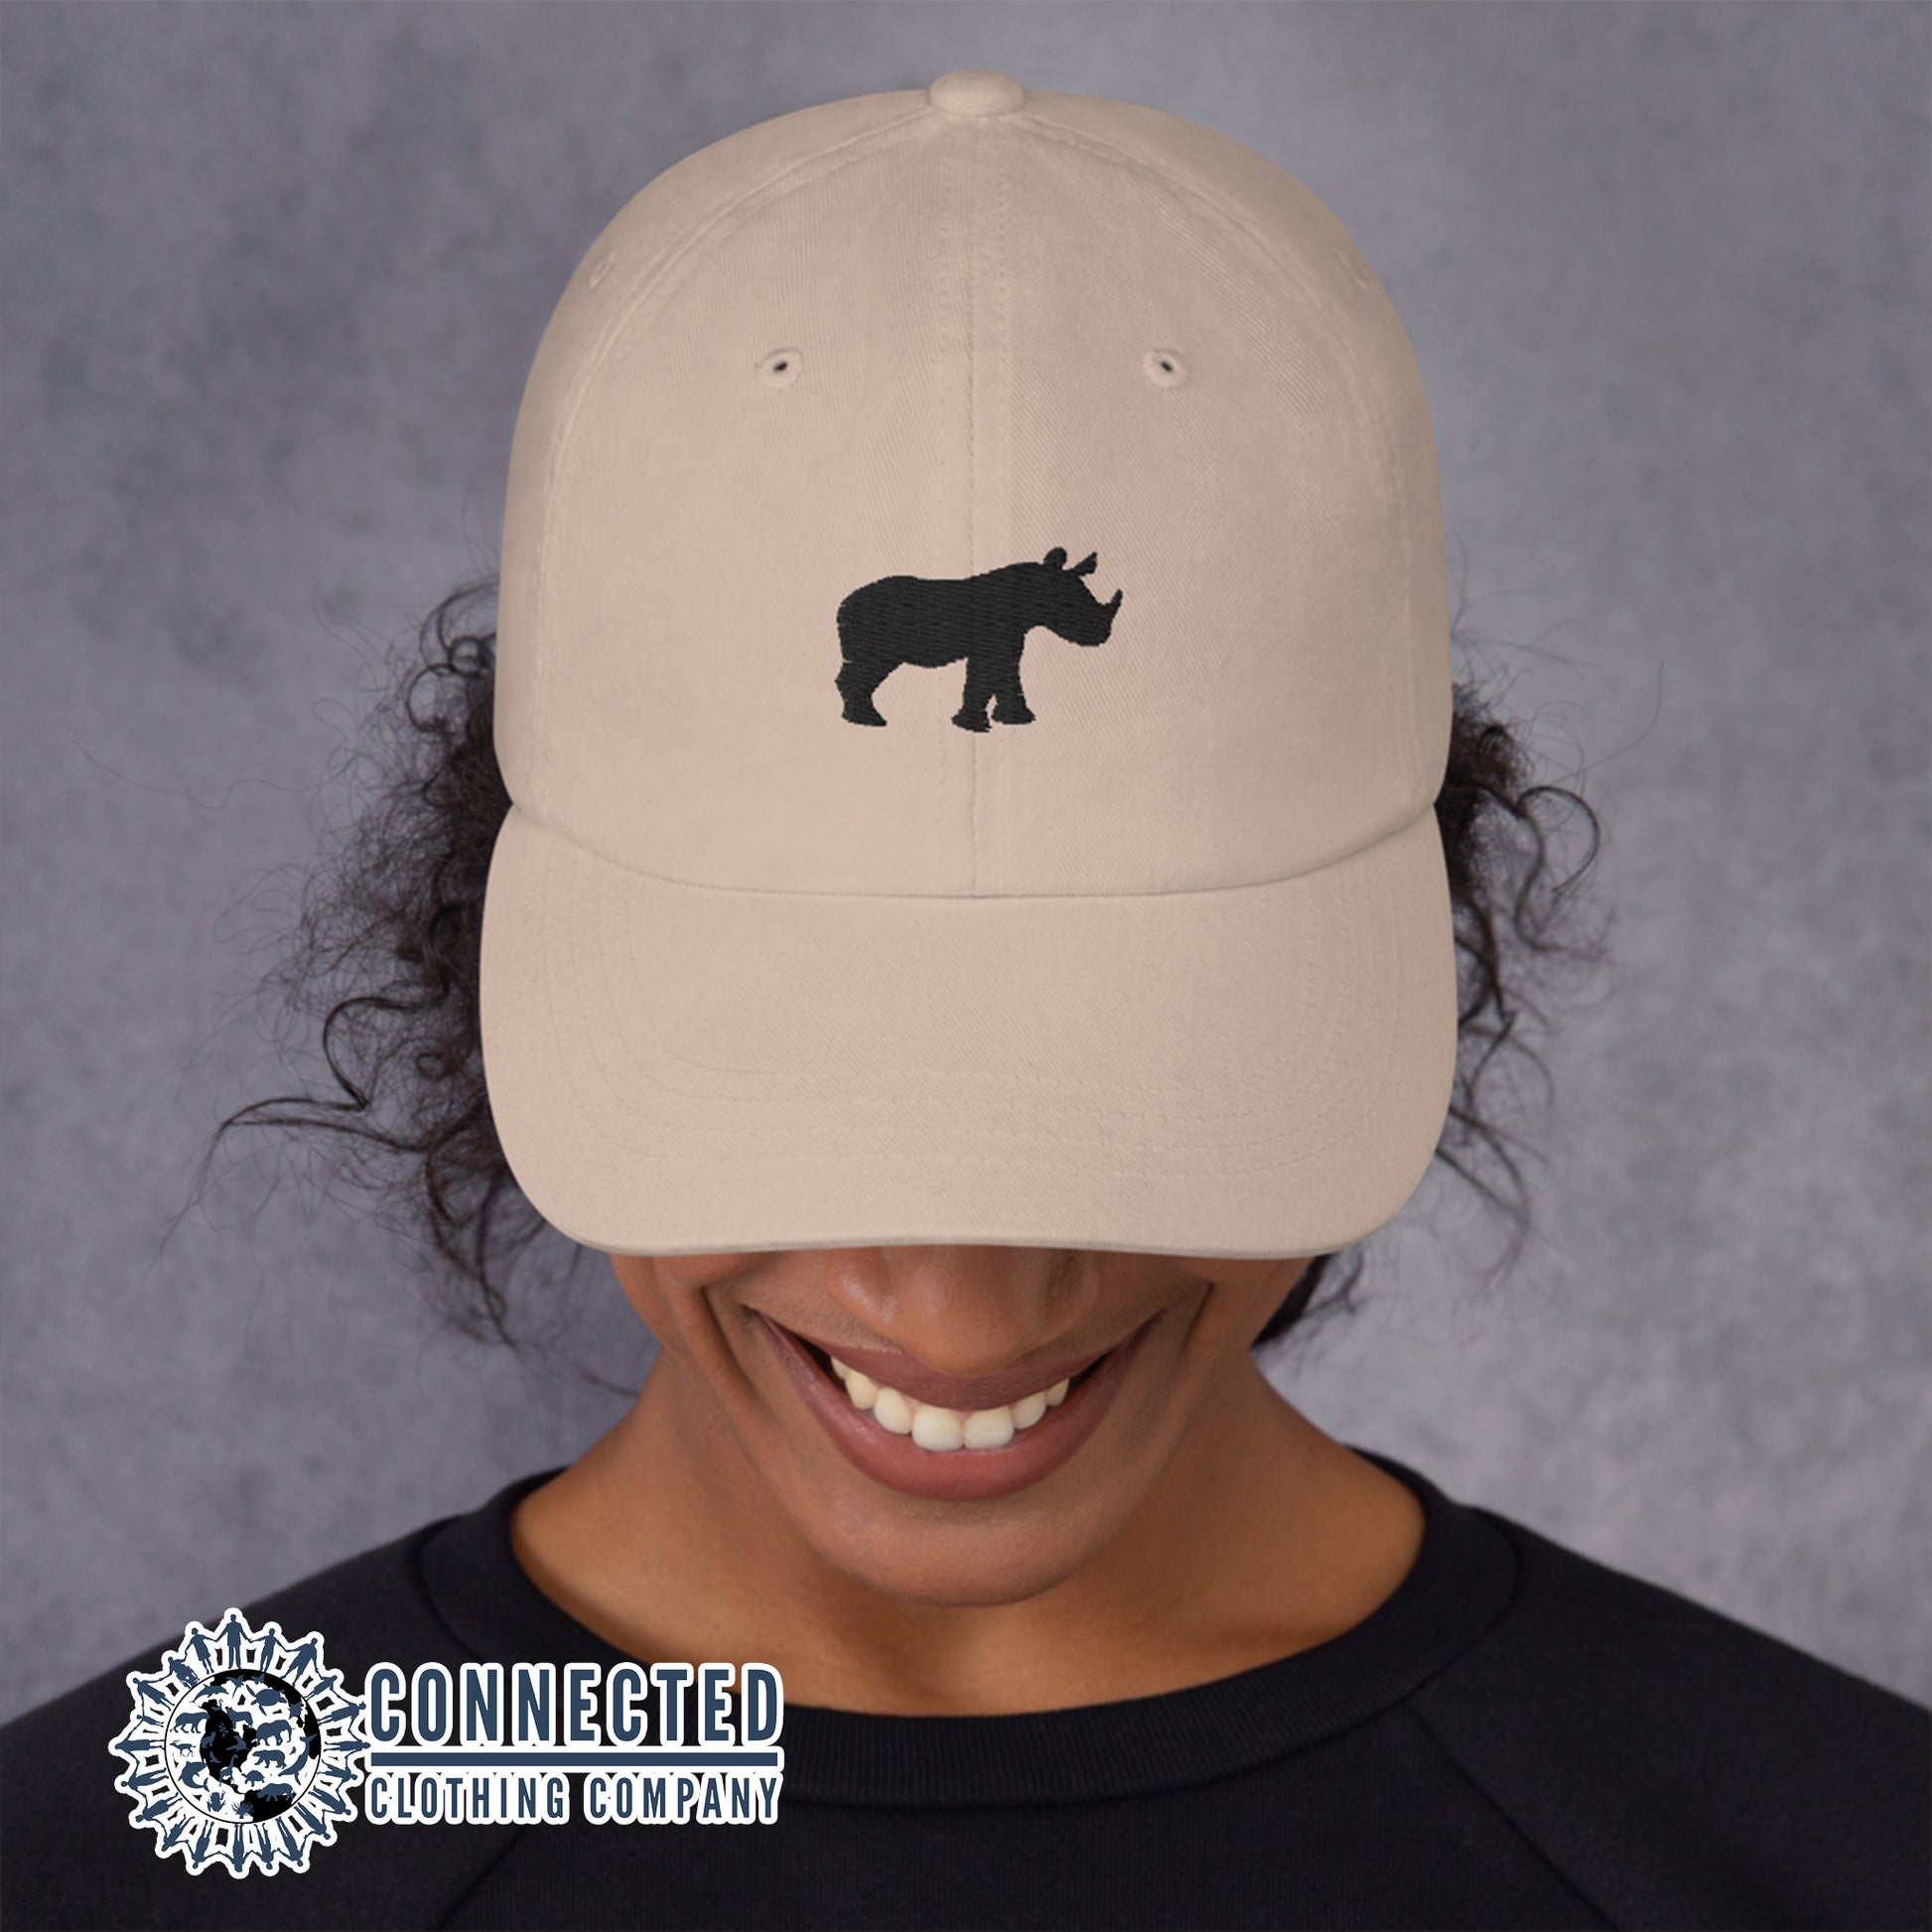 Model Wearing Stone Rhino Cotton Cap - Connected Clothing Company - 10% of profits donated to Save The Rhino conservation